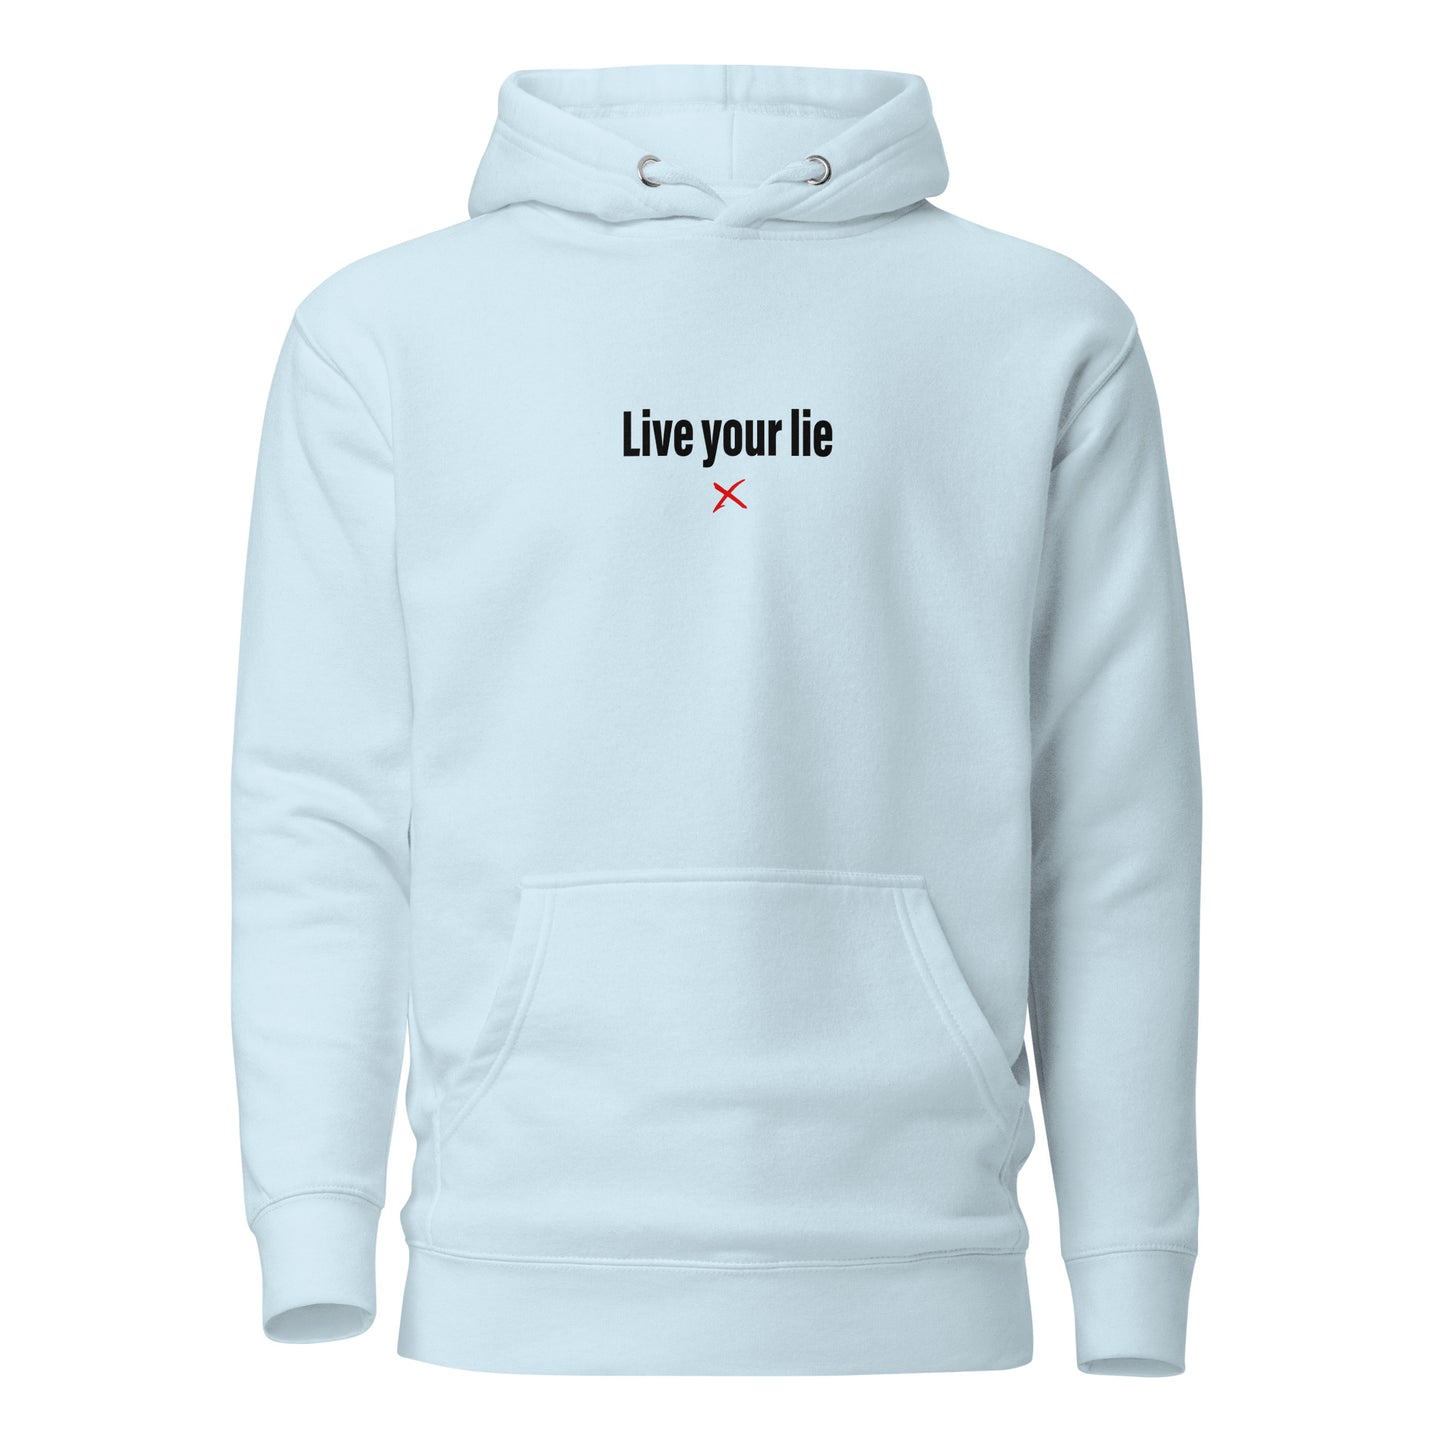 Live your lie - Hoodie